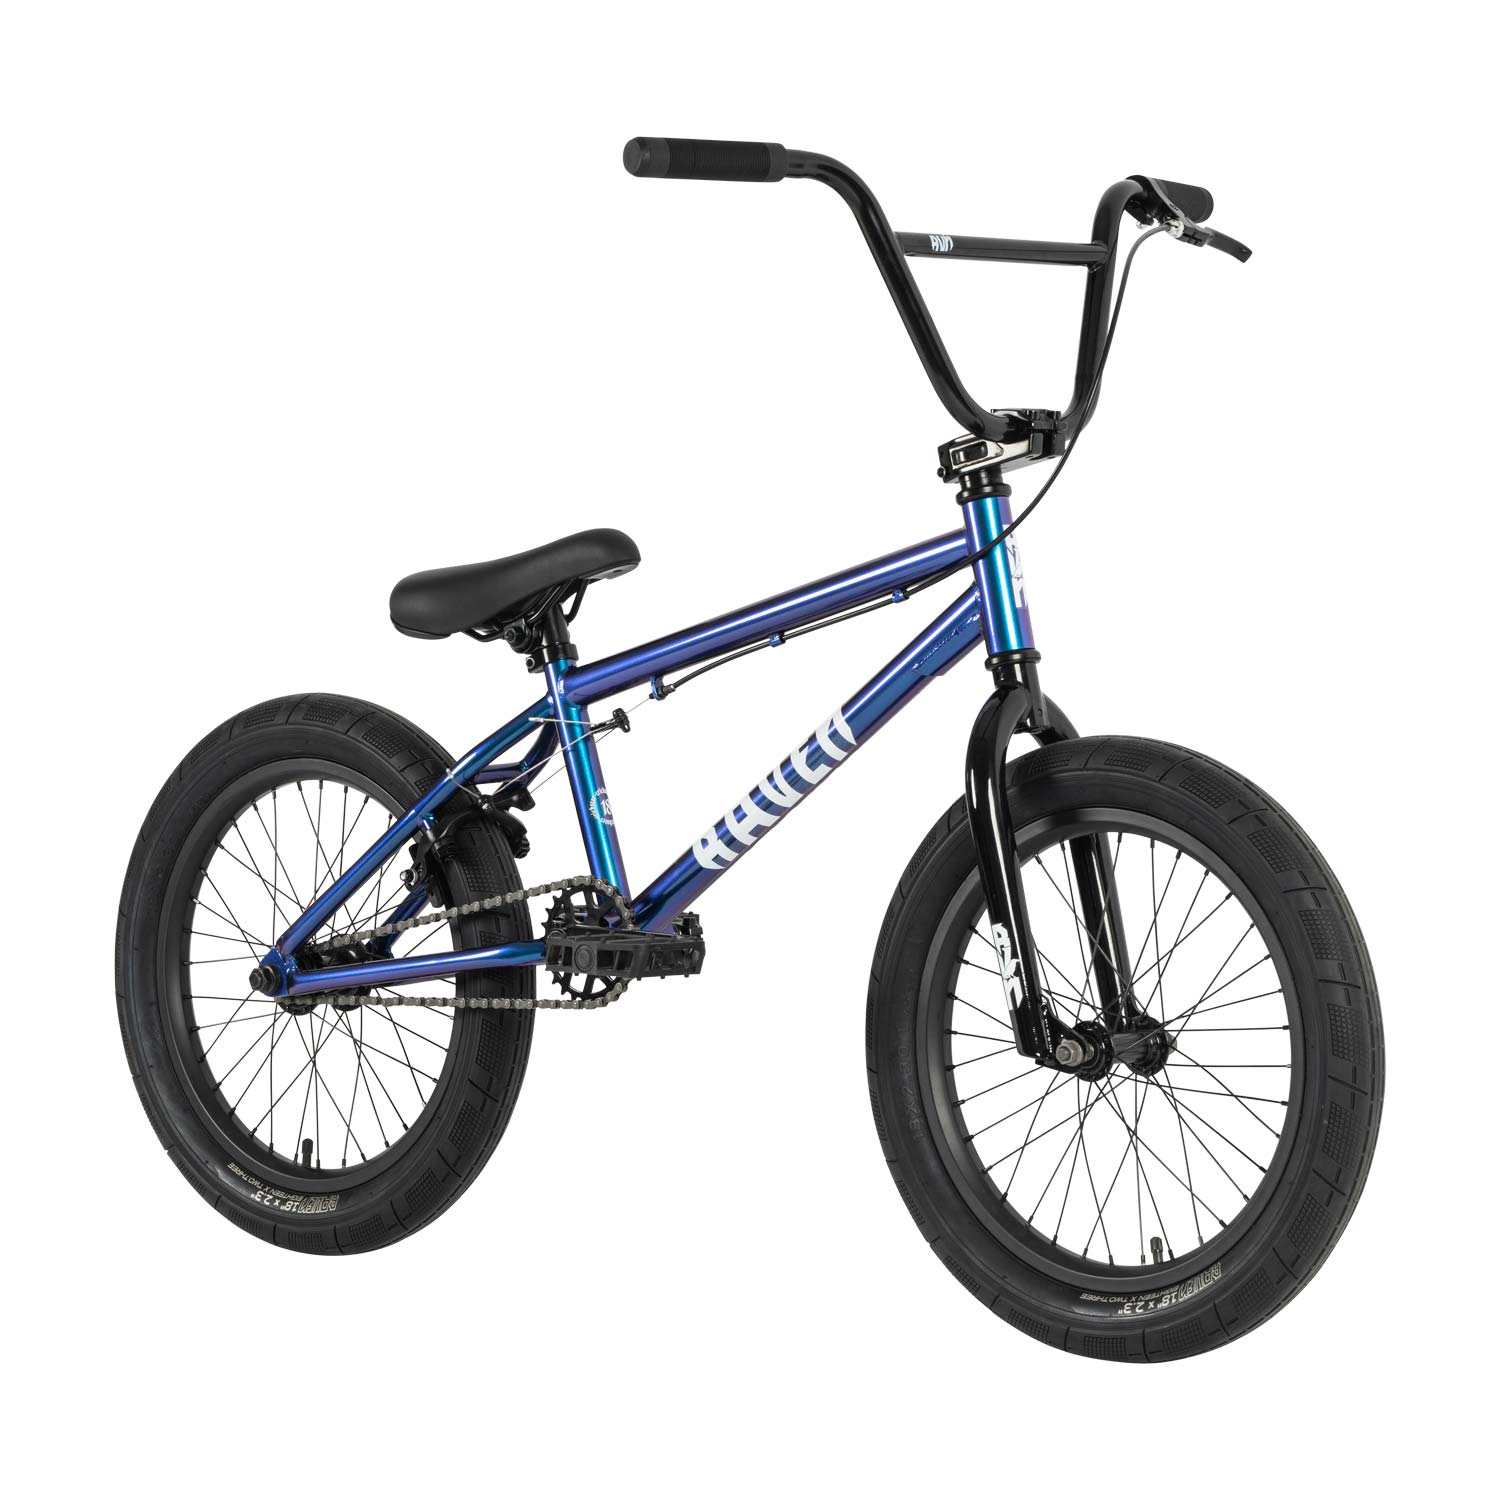 A blue affordable Raven Trickster 18 Inch Bike on a white background.